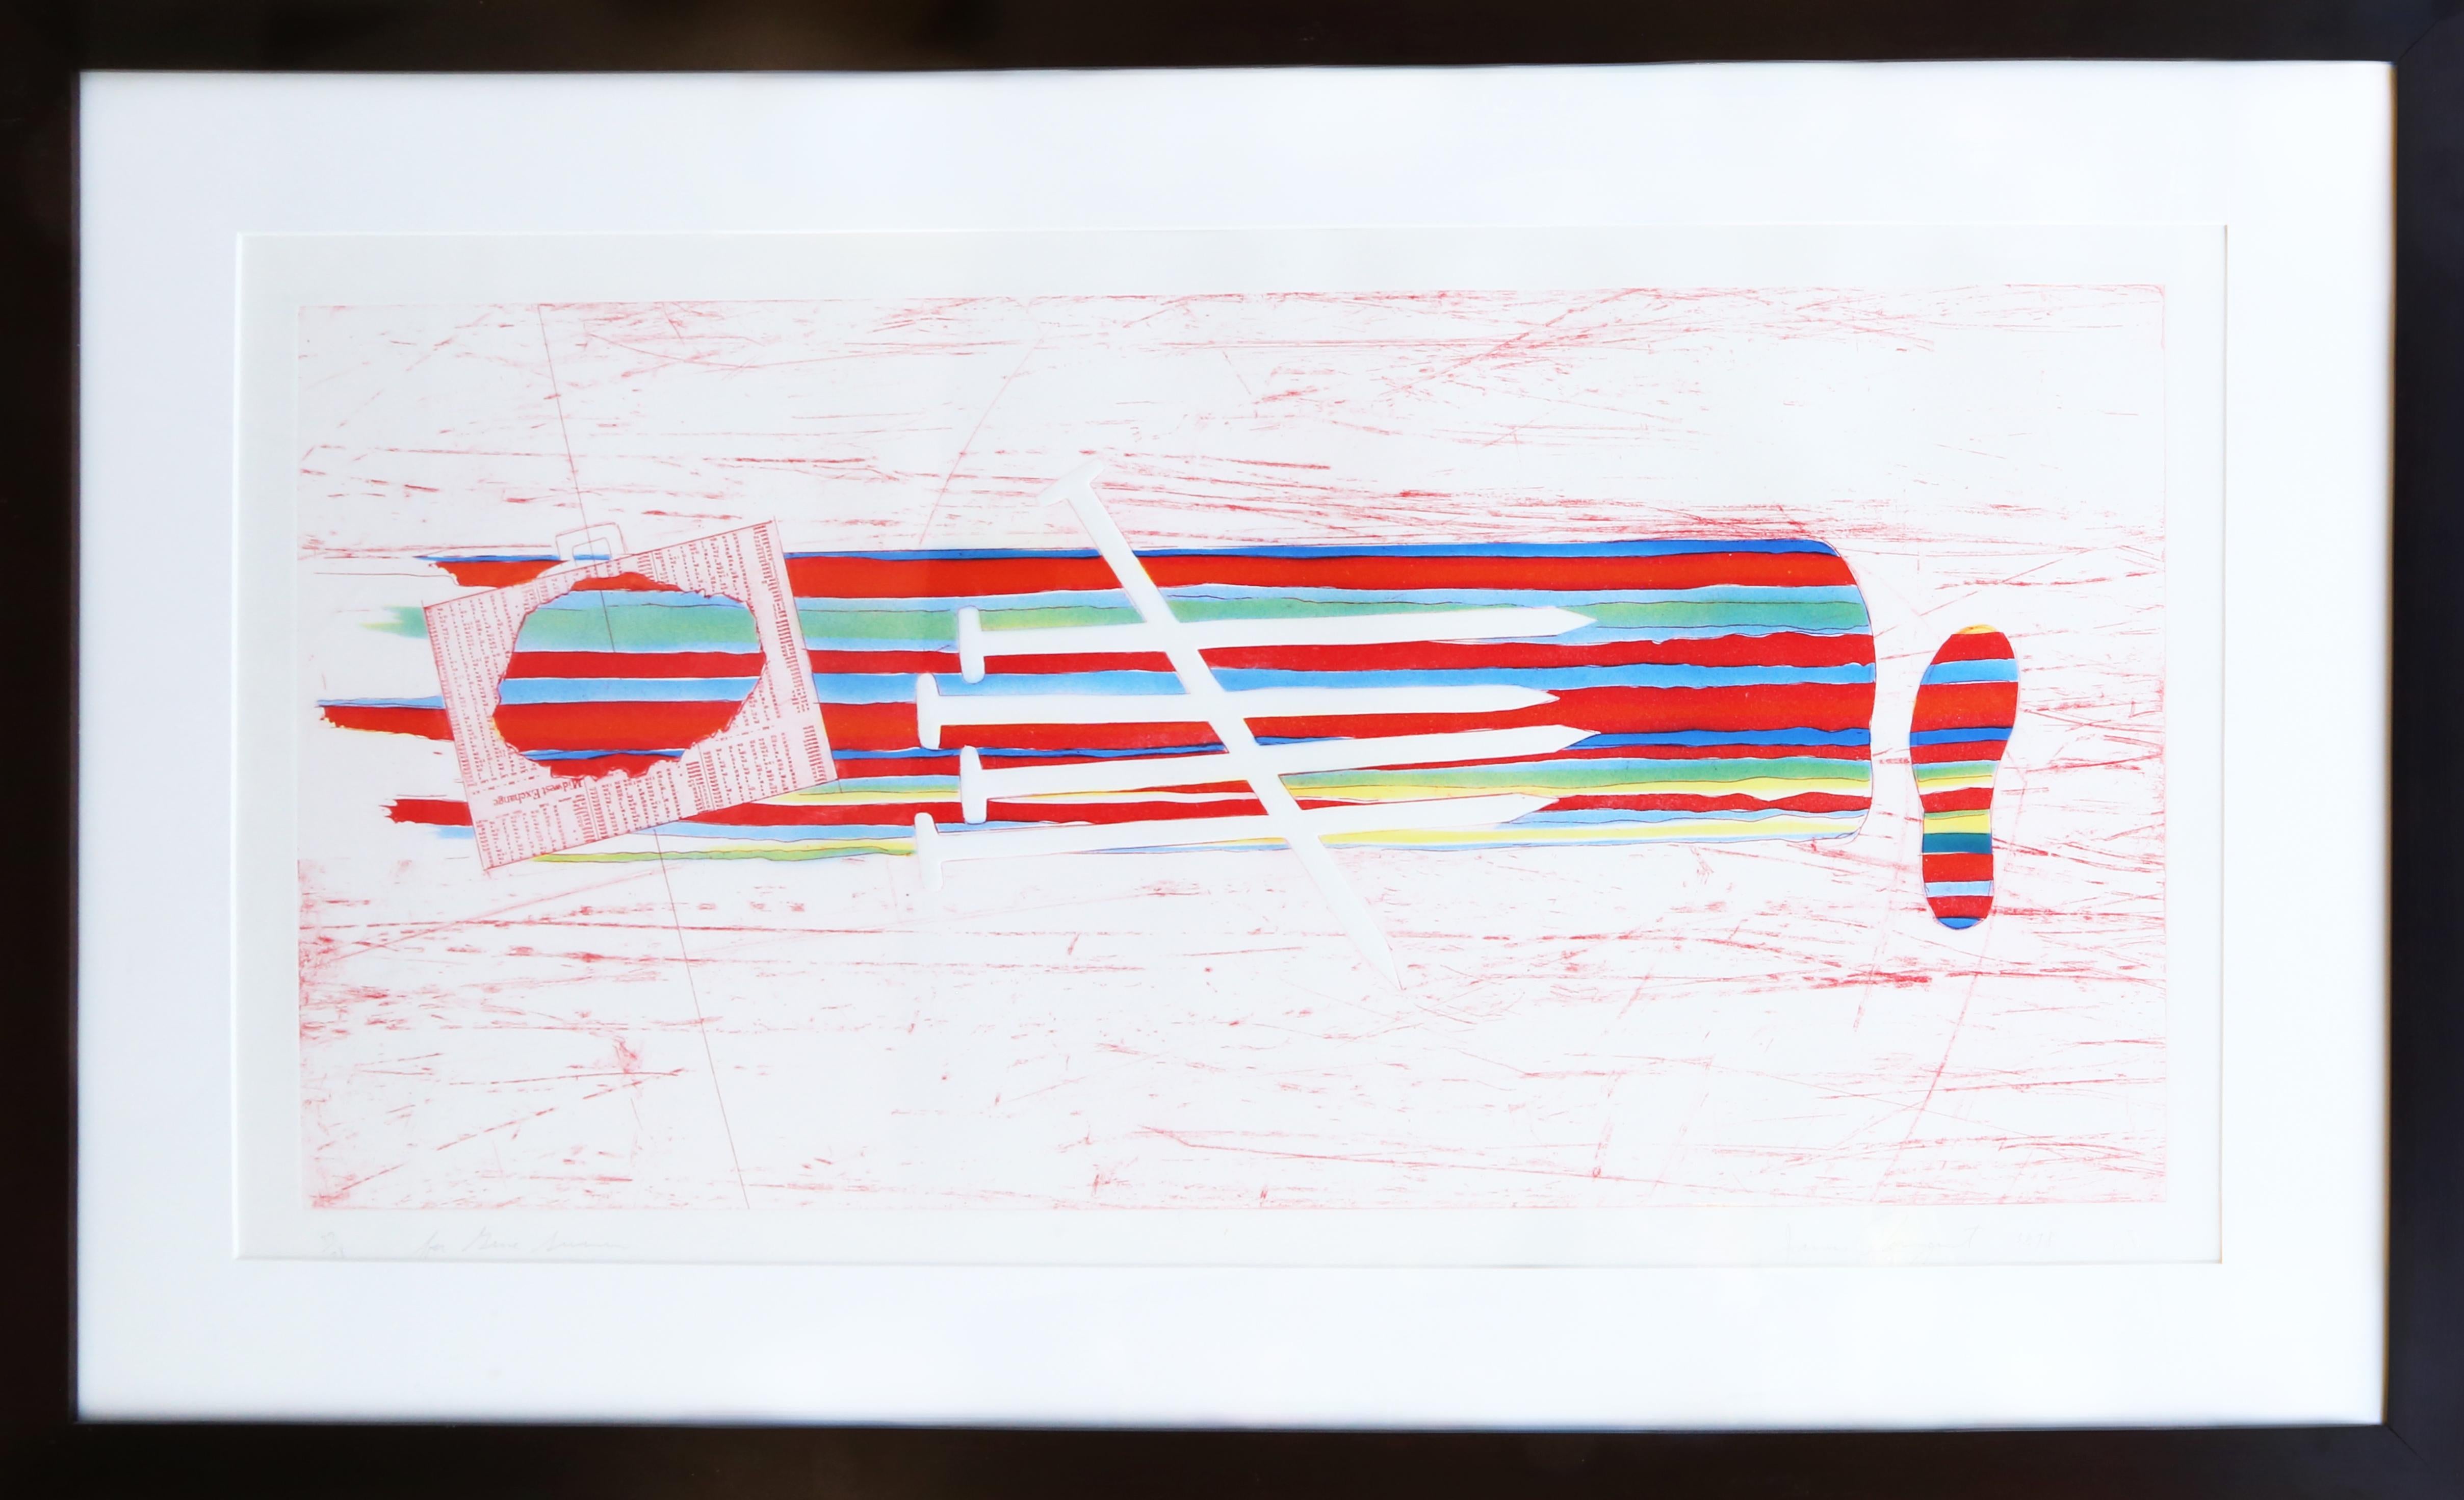 For Gene Swenson by James Rosenquist, American (1933–2017)
Date: 1978
Etching/Aquatint with Embossing on Pescia Italia
Edition of 37/78
Size: 23 x 40 in. (58.42 x 101.6 cm)
Frame Size: 30 x 48 inches